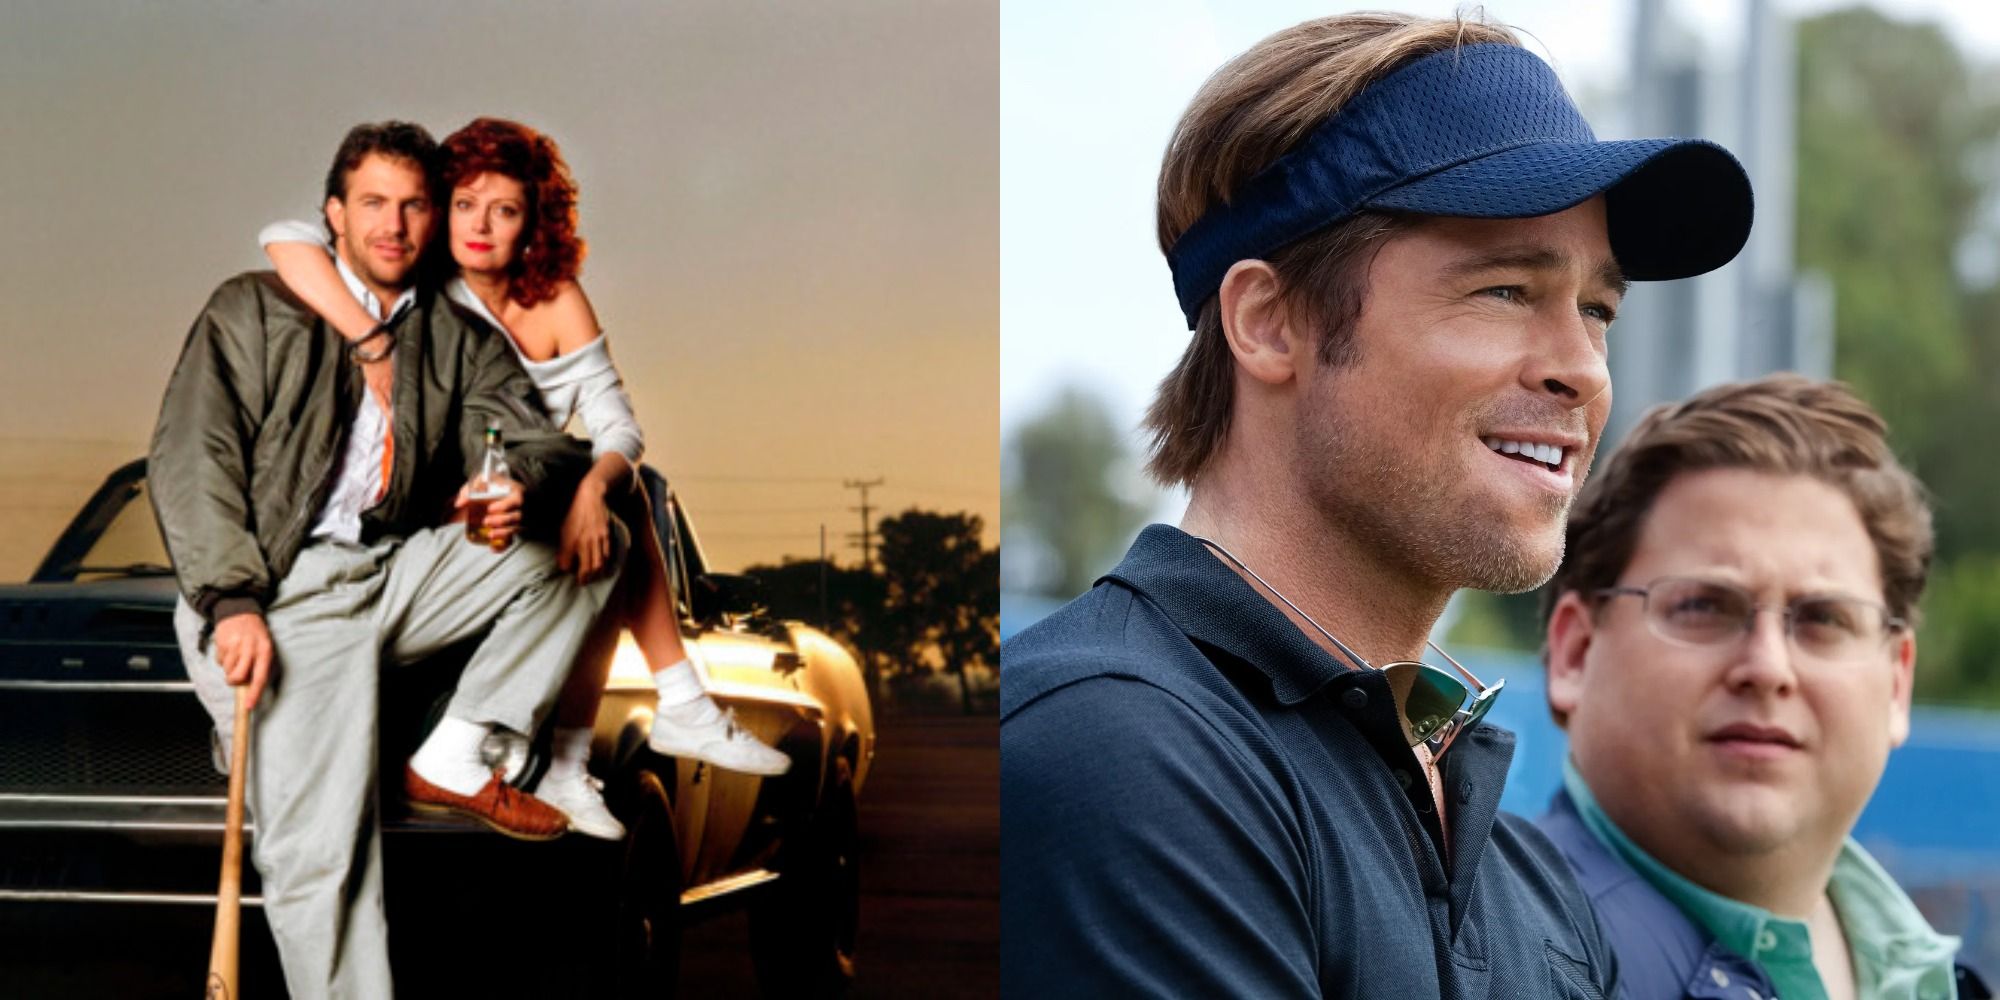 Split image showing characters from Bull Durham and Moneyball.